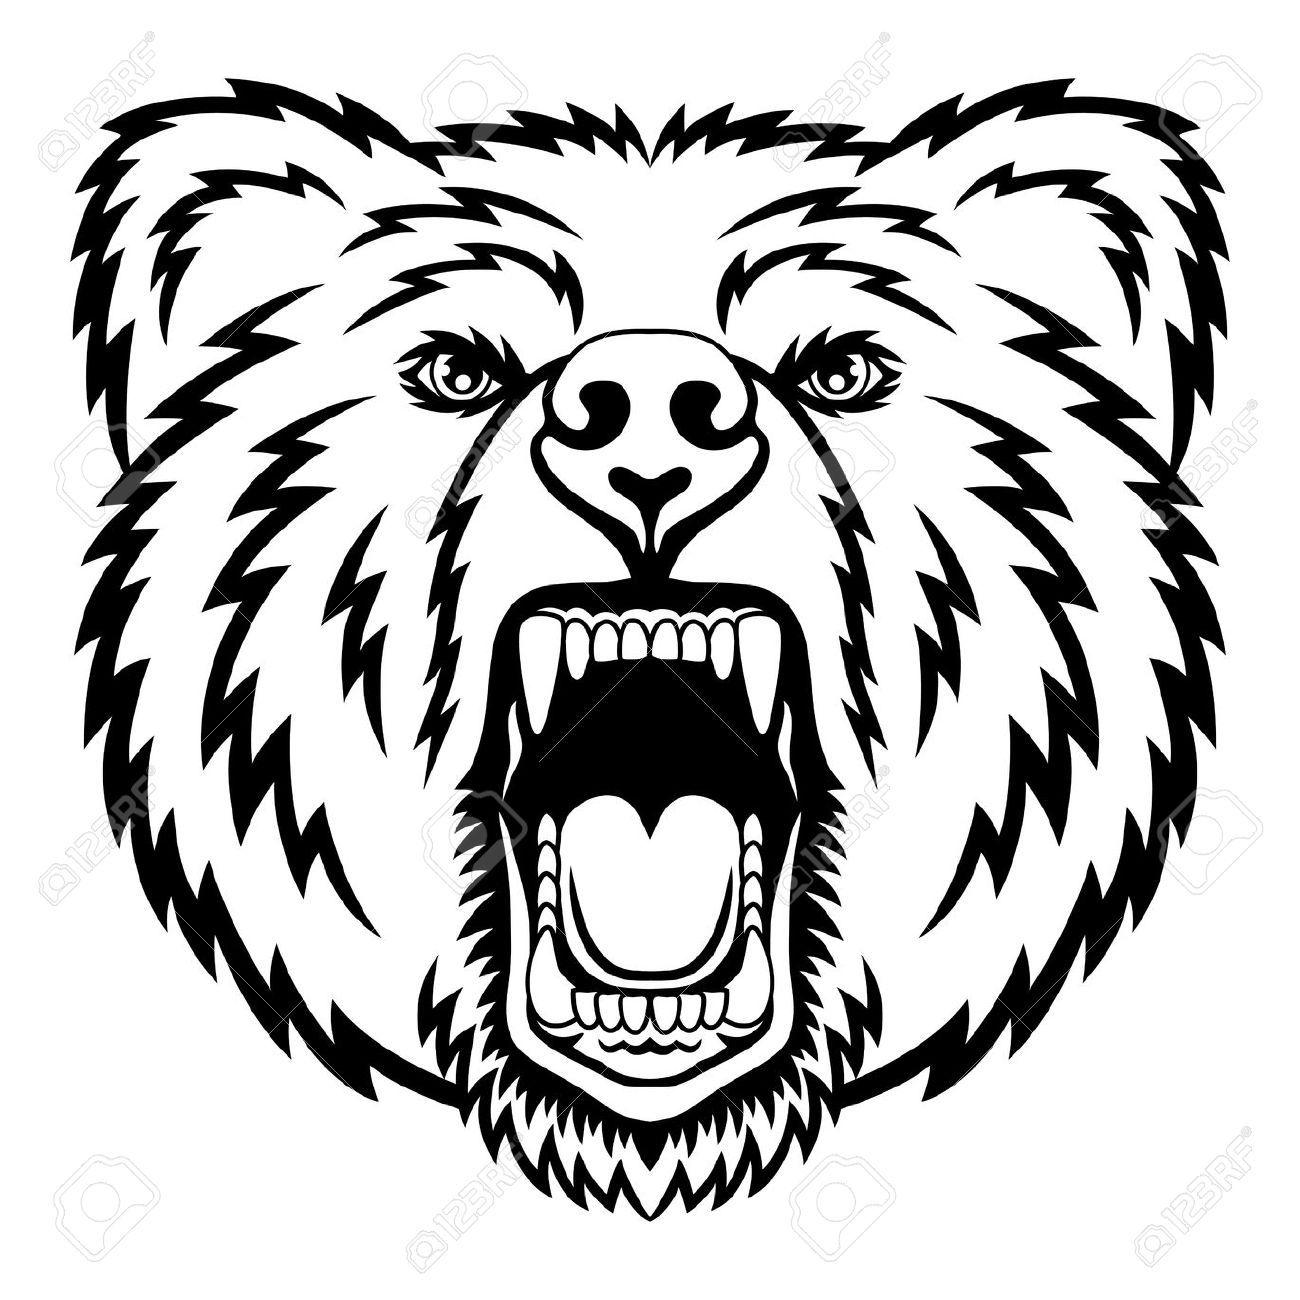 Grizzly Head Logo - Grizzly Bear Head Drawing at GetDrawings.com | Free for personal use ...